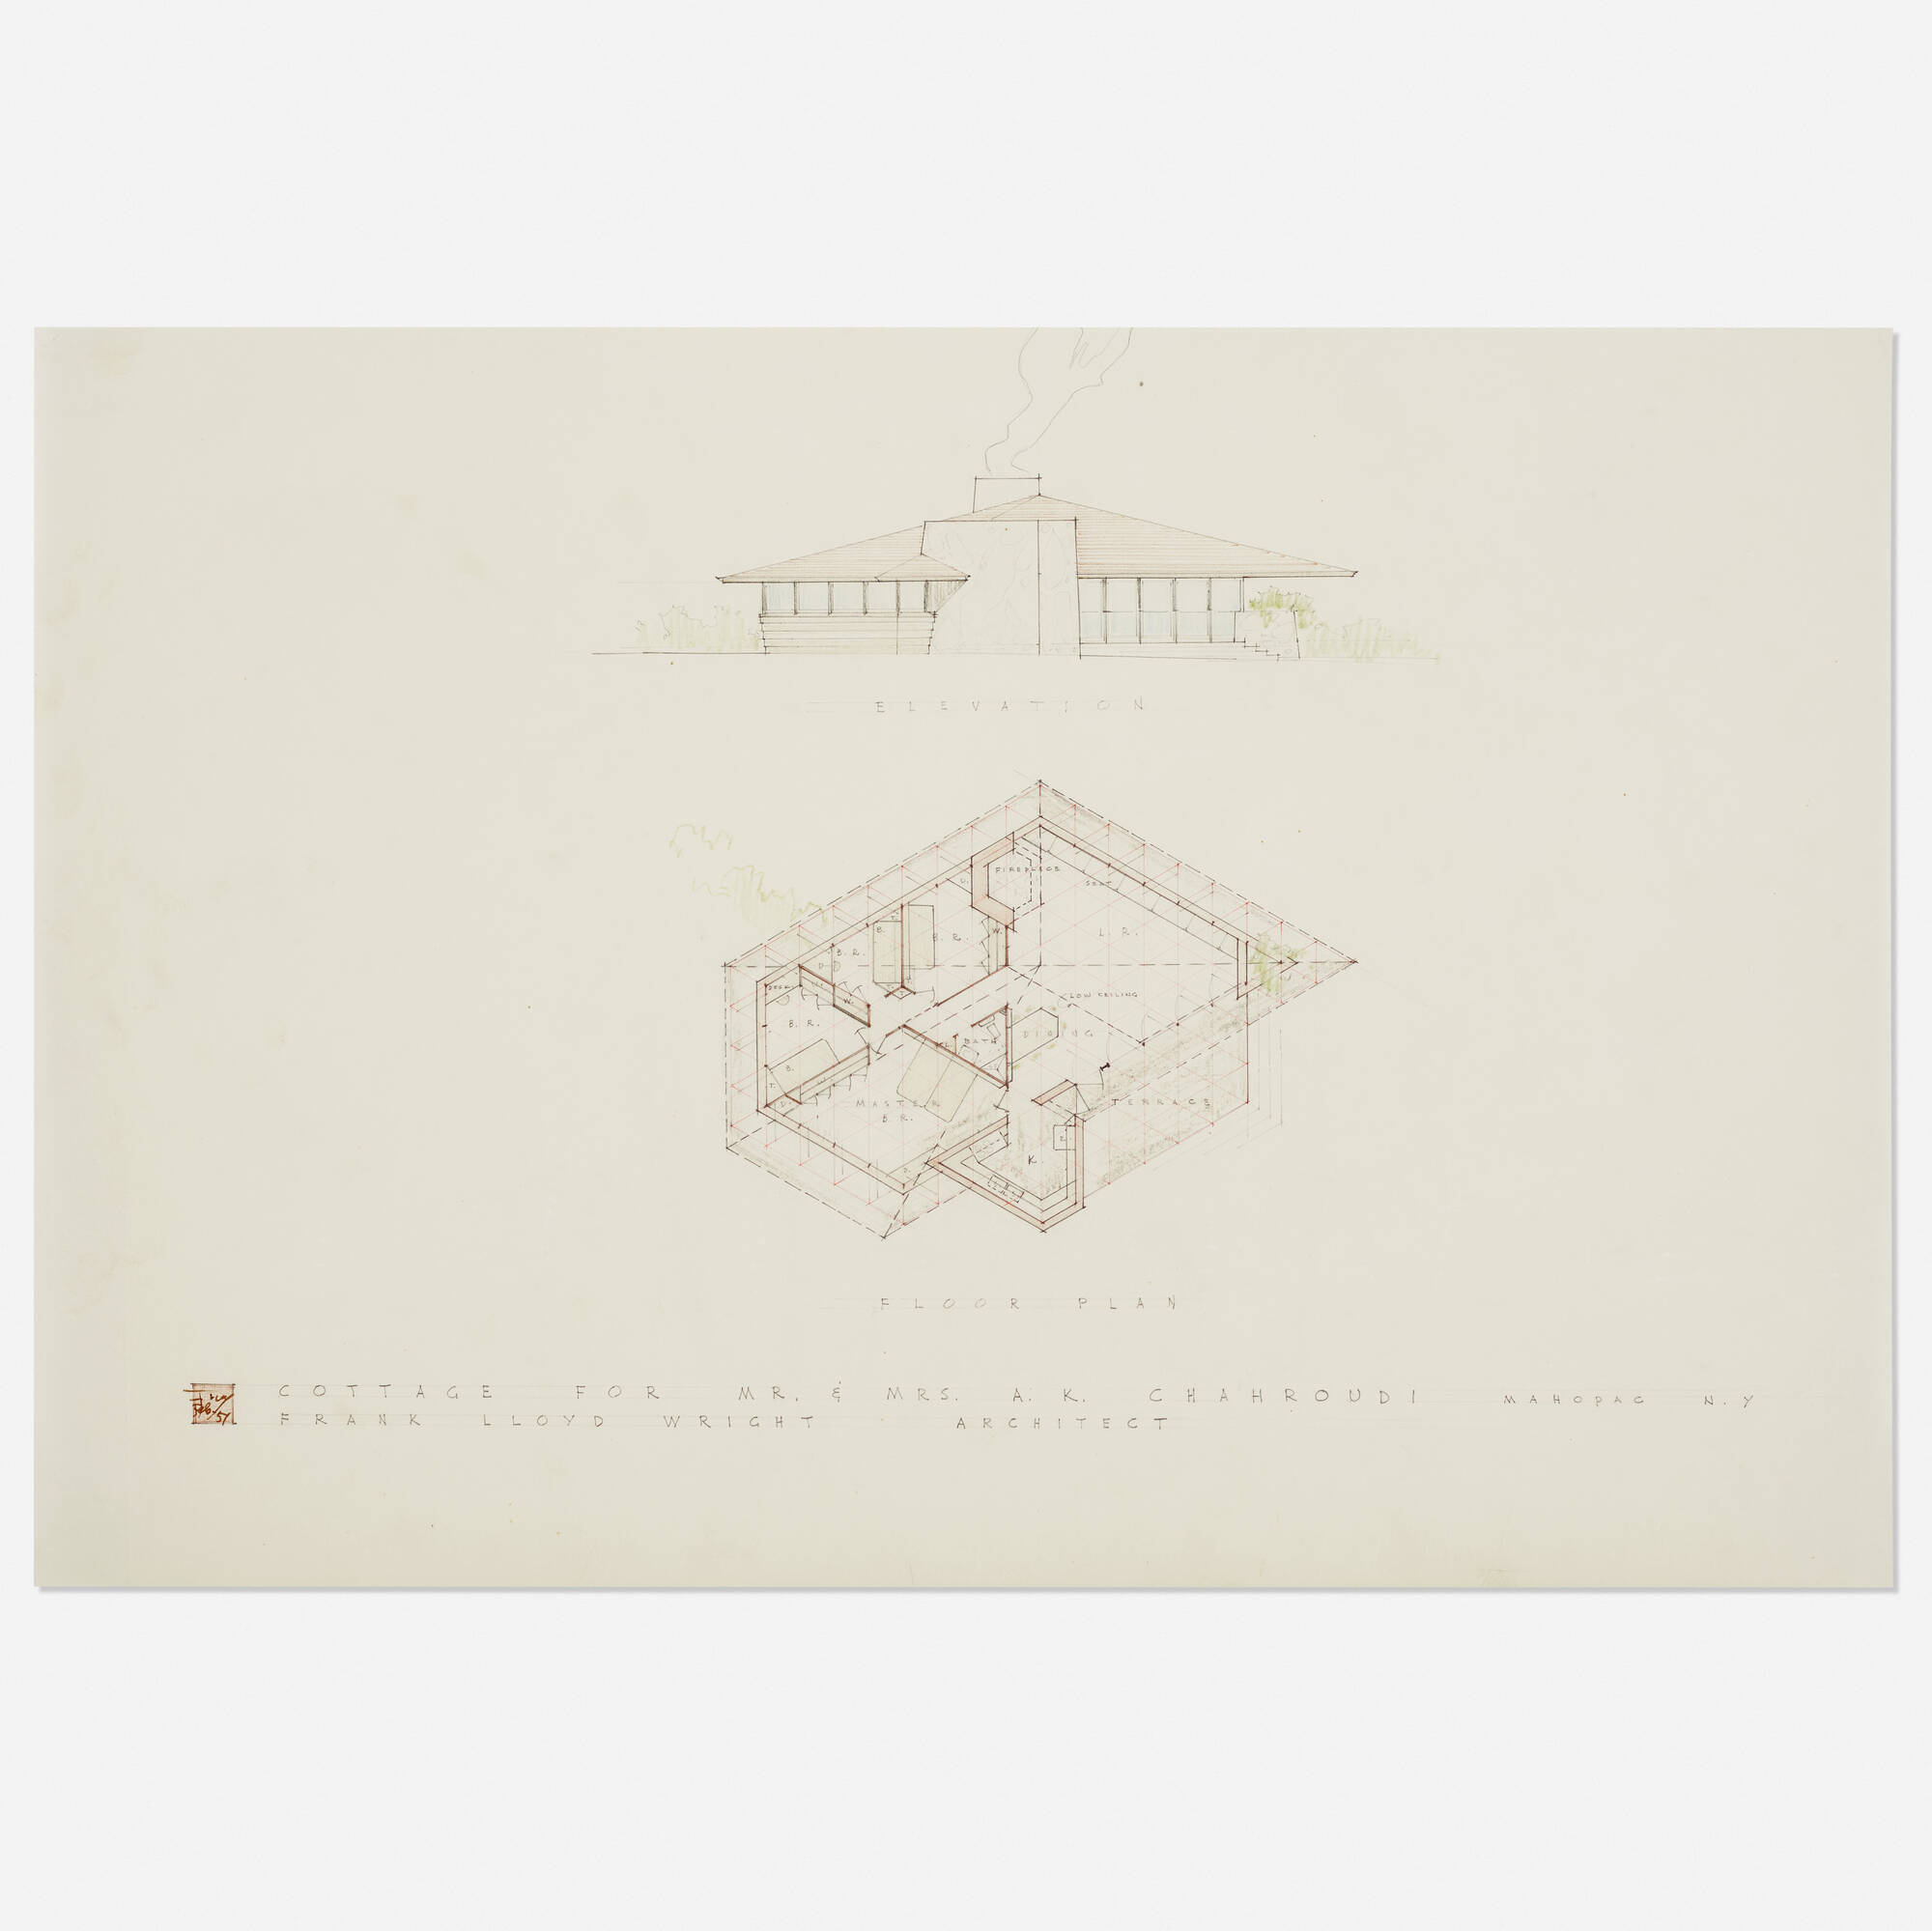 424 Frank Lloyd Wright Elevation And Plan For The Chahroudi